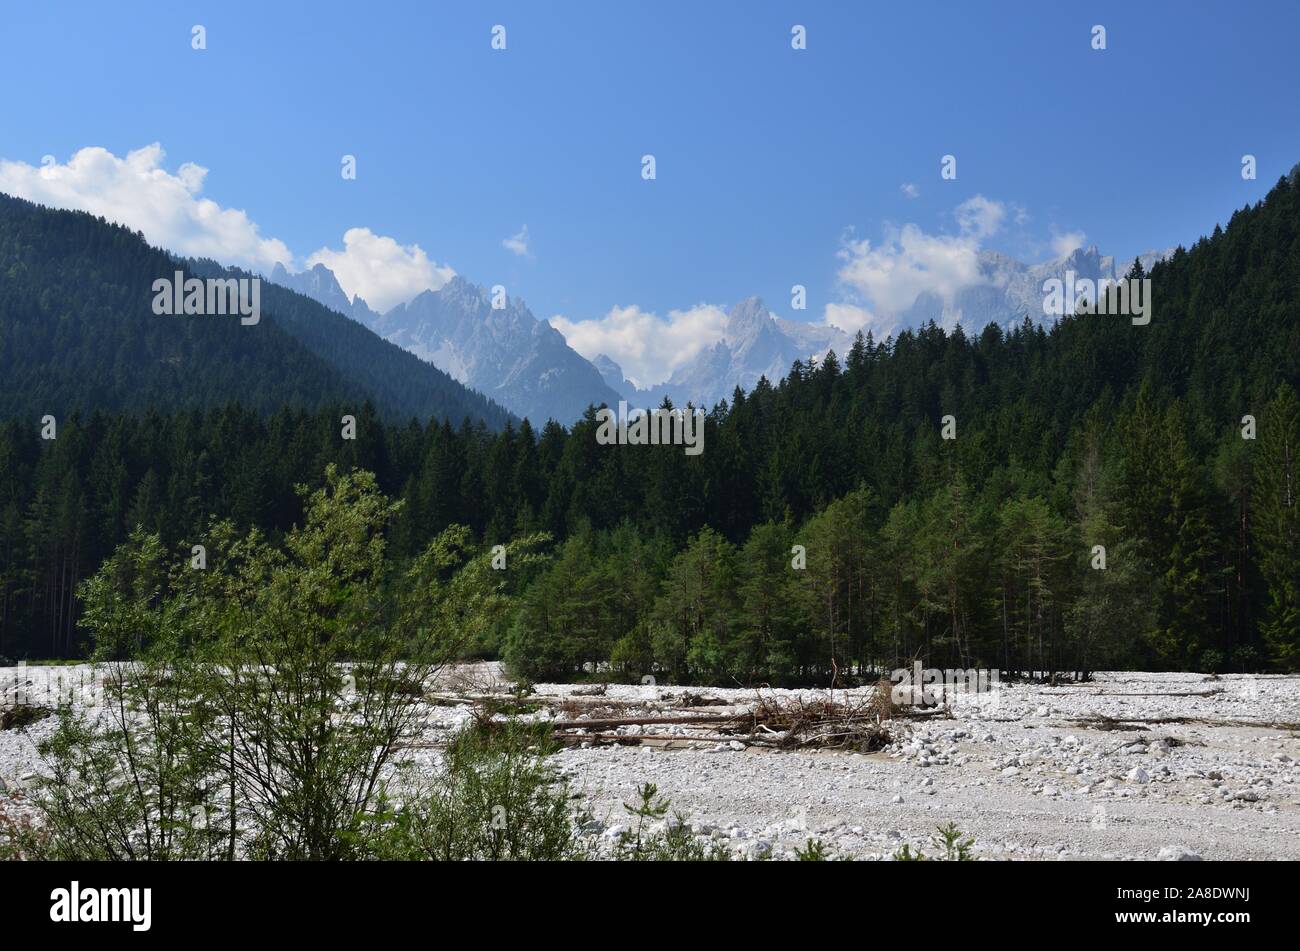 The bed of the Ansiei river, stony and with little water, surrounded by woods and mountains Stock Photo